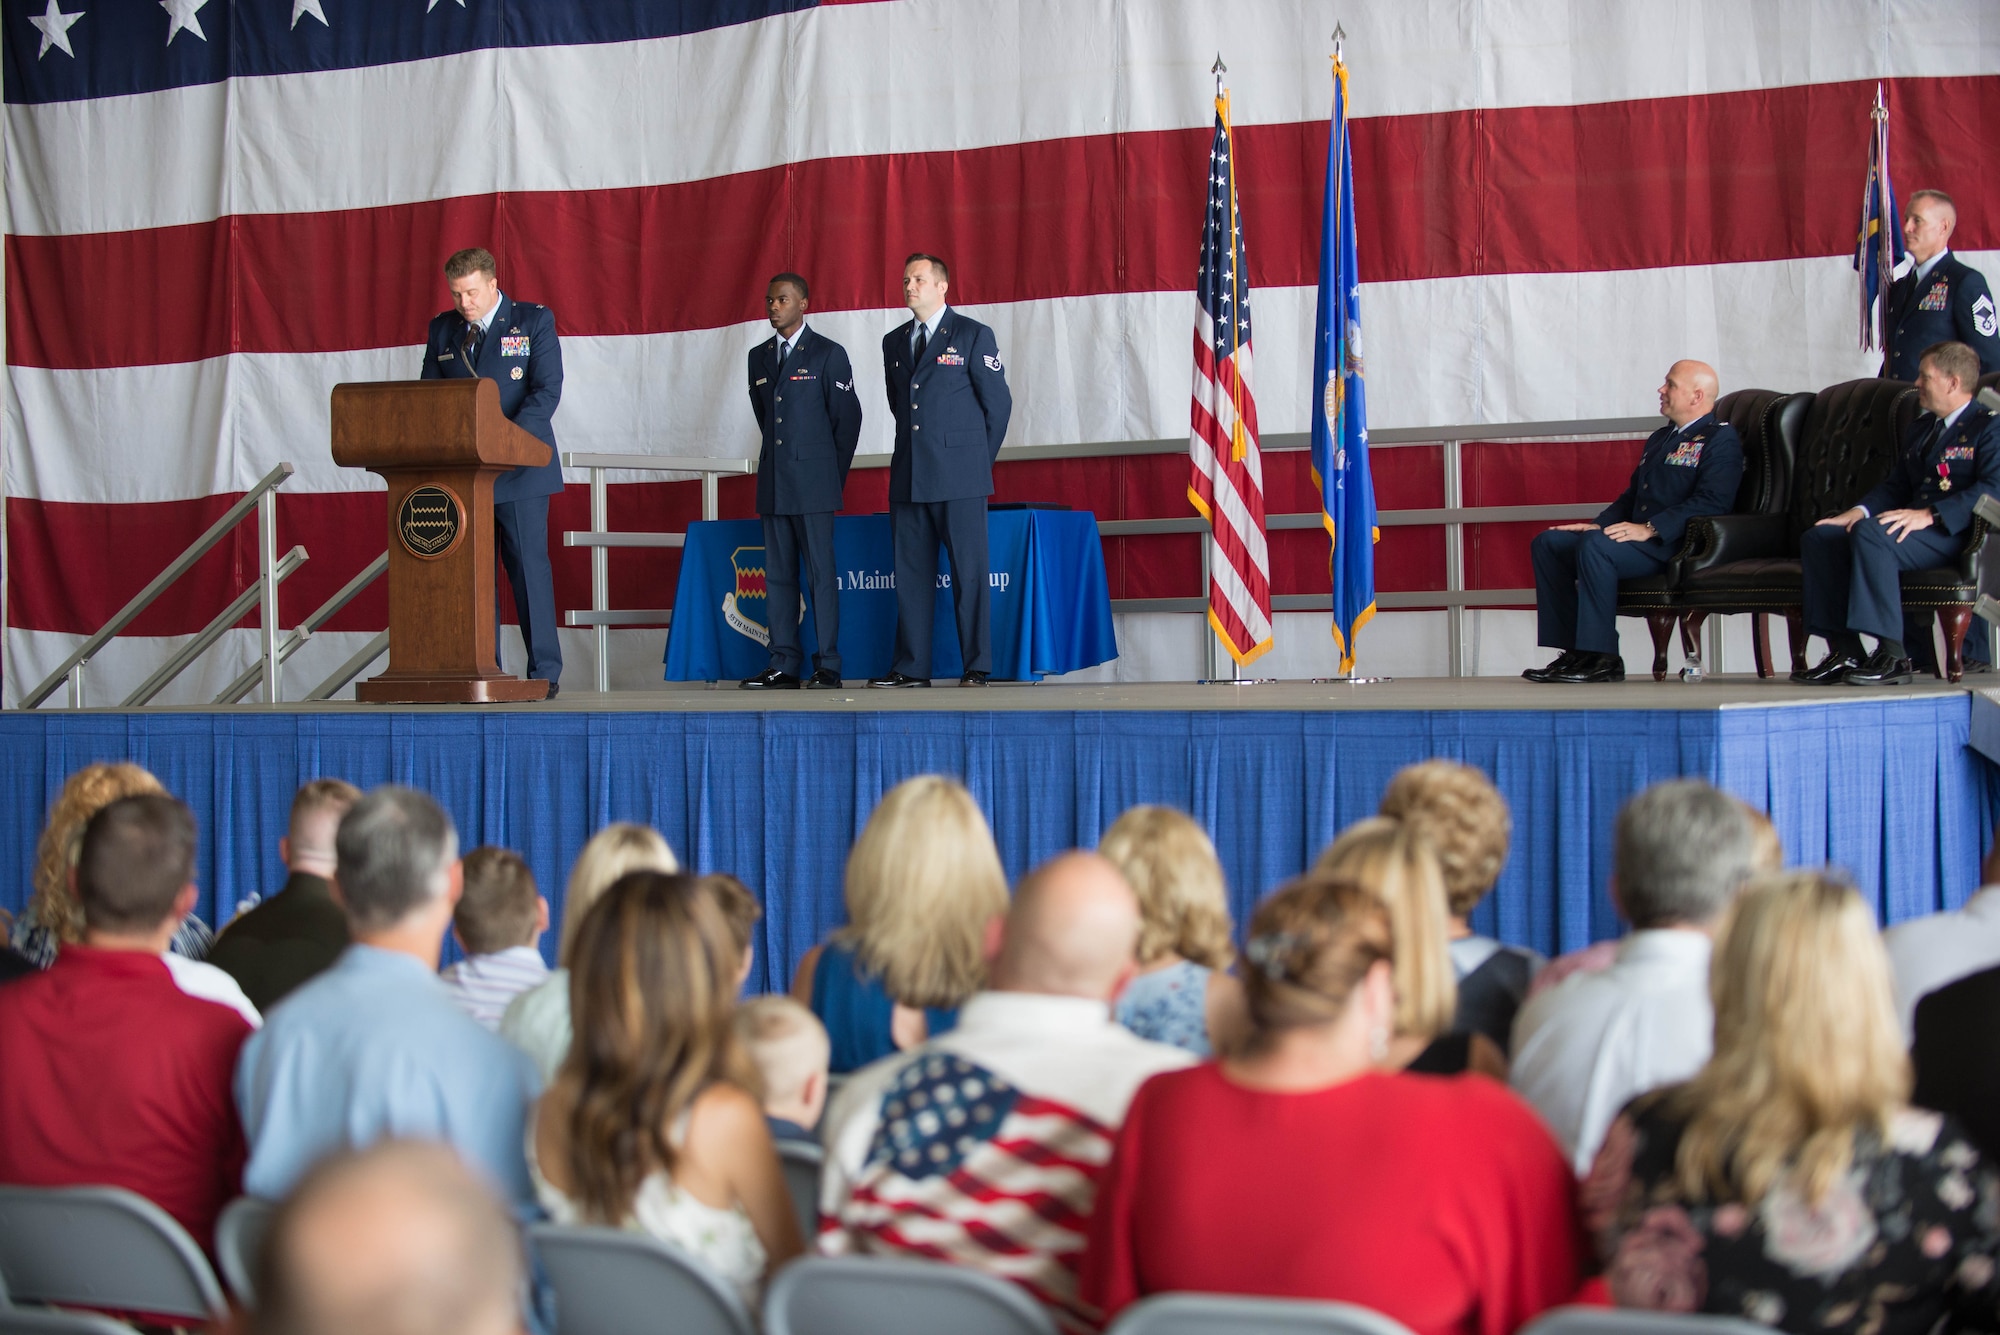 U.S. Air Force Col. Todd Hammond, the incoming 55th Maintenance Group (MXG) commander, speaks during a change of command ceremony July 25, 2018, at Offutt Air Force Base (AFB), Nebraska. Before coming to Offutt AFB, Hammond led the 51st Maintenance Group at Osan Air Base, Republic of Korea. (U.S. Air Force photo by Zachary Hada )